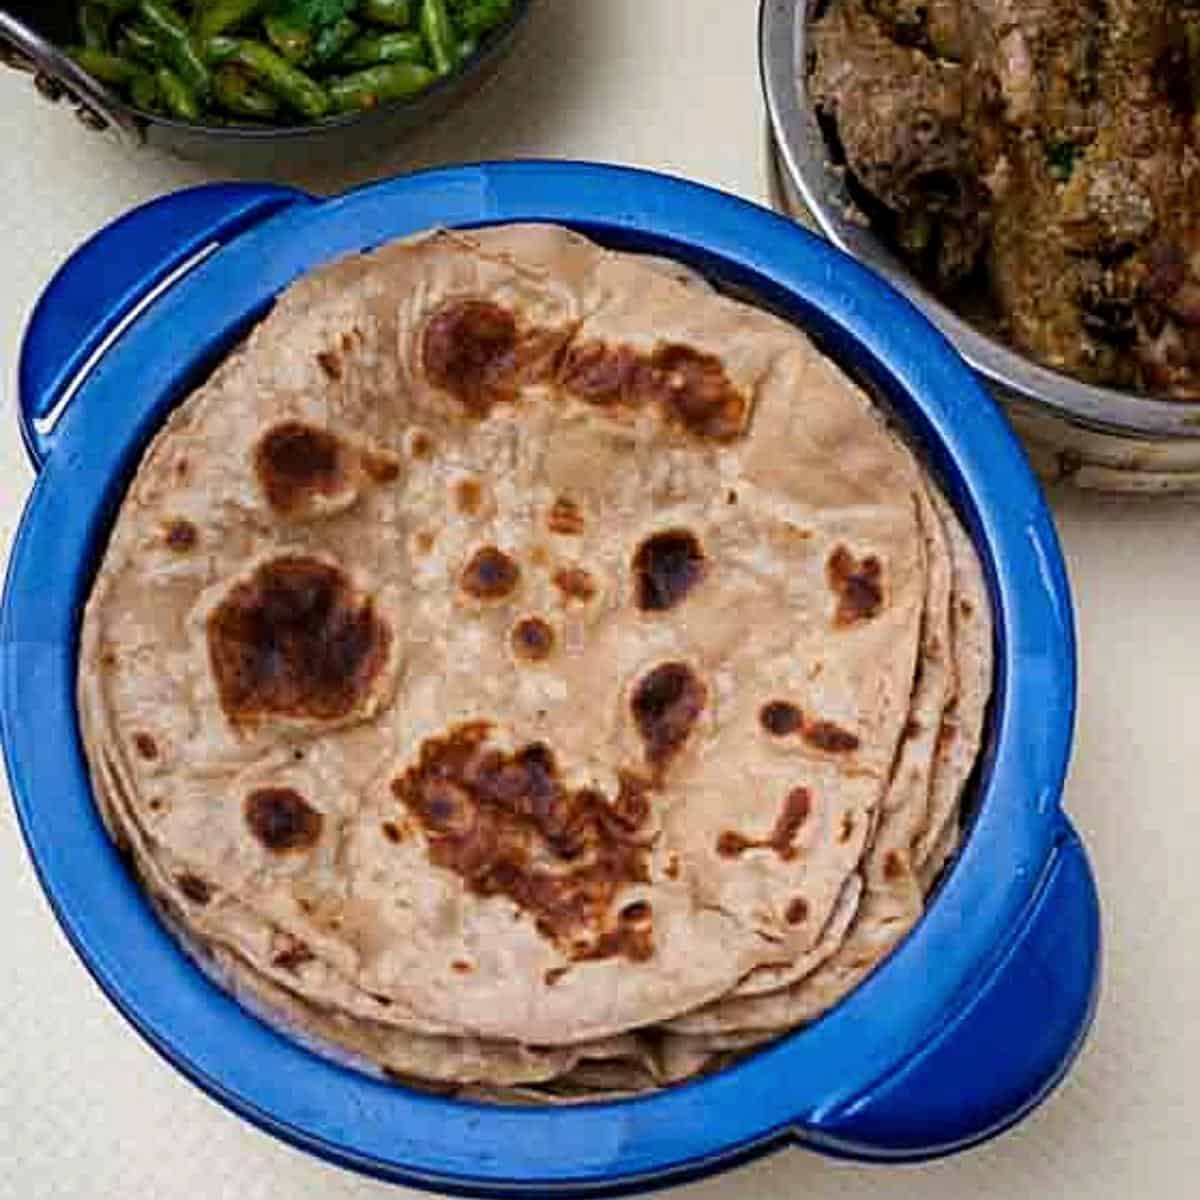 A tupperware with tortillas or chapati made with whole wheat flour.